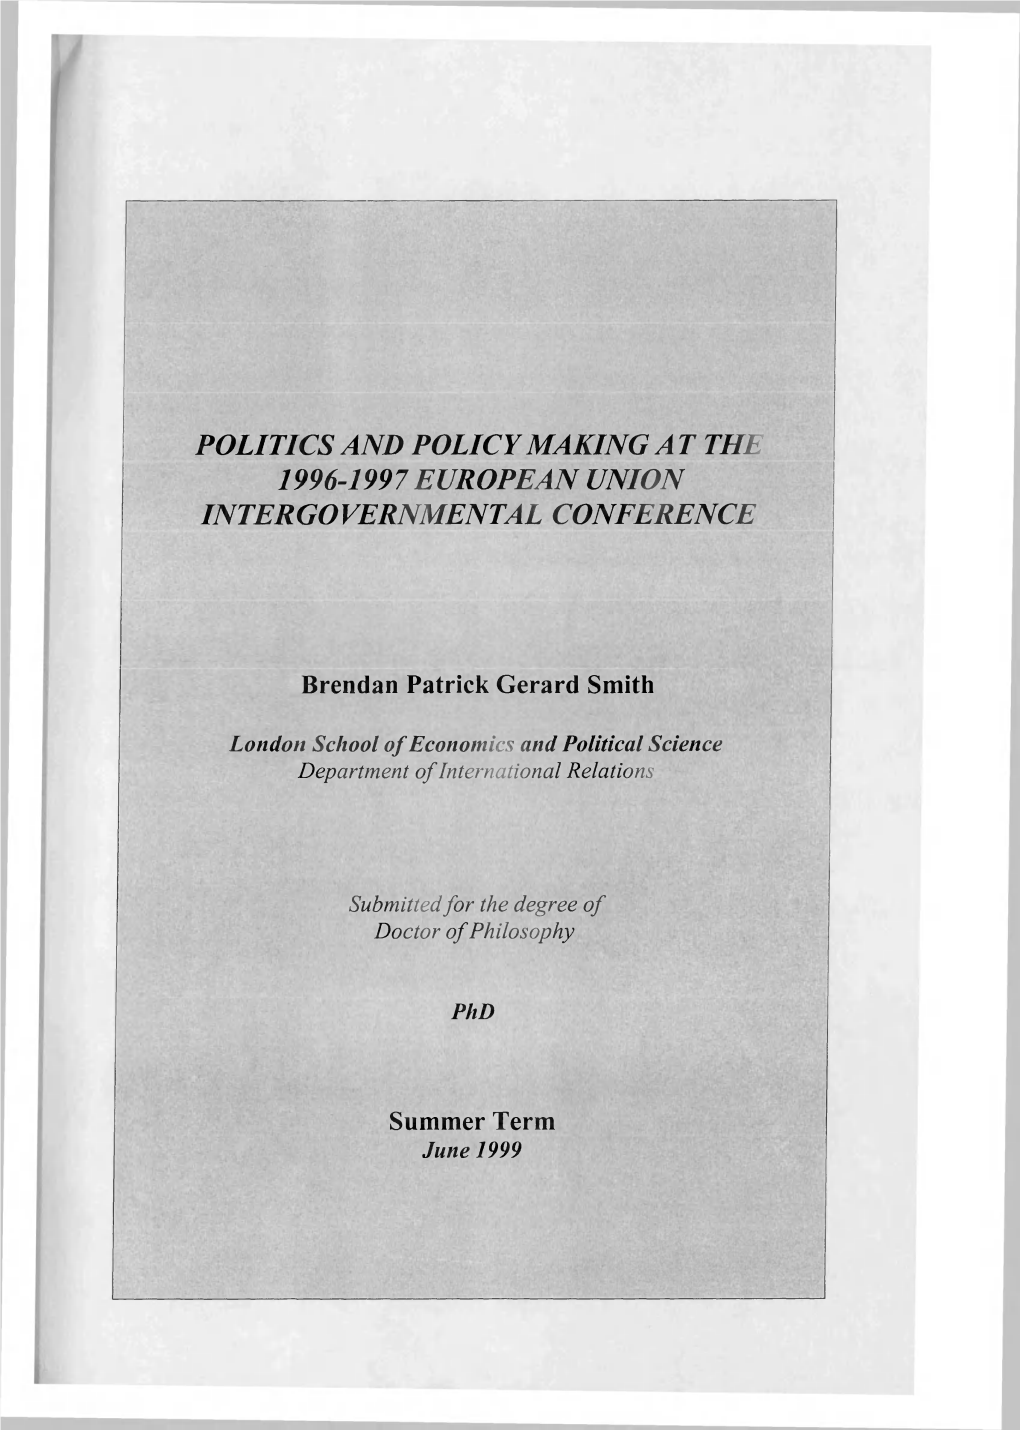 Politics and Policy Making at the 1996-1997European Union